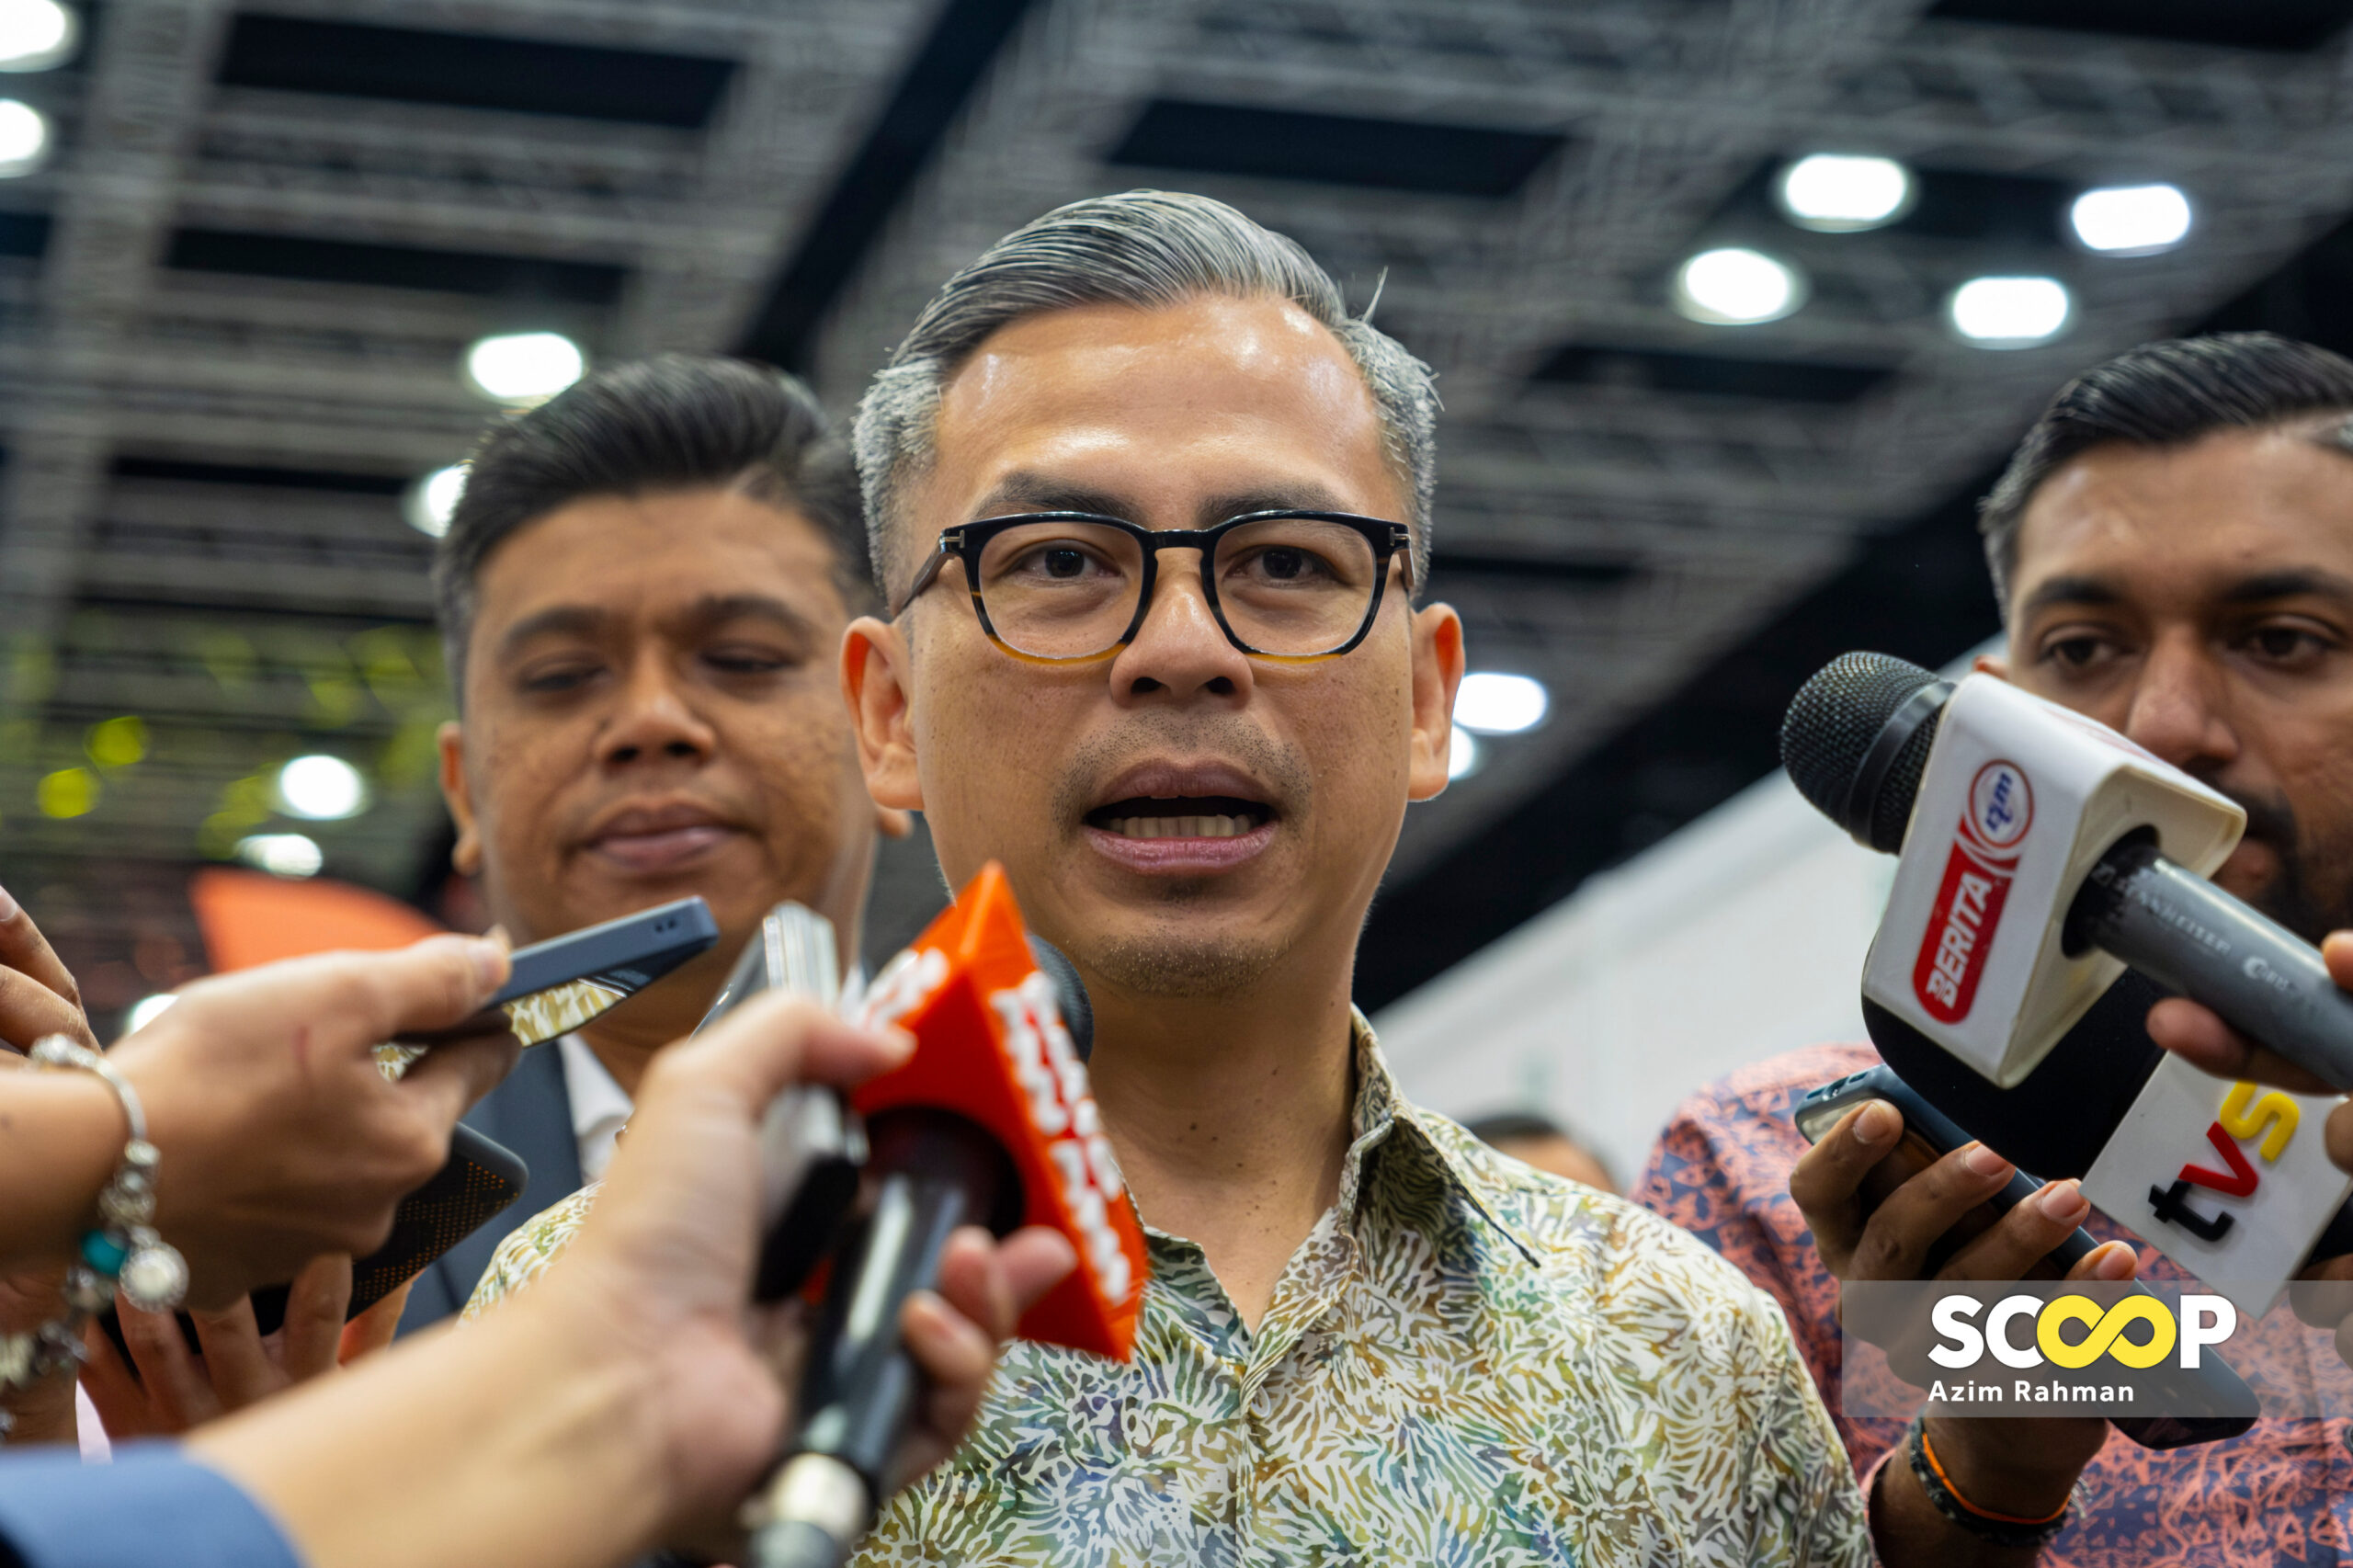 If you advise others, you have to take it too: Fahmi on Hassan’s reaction